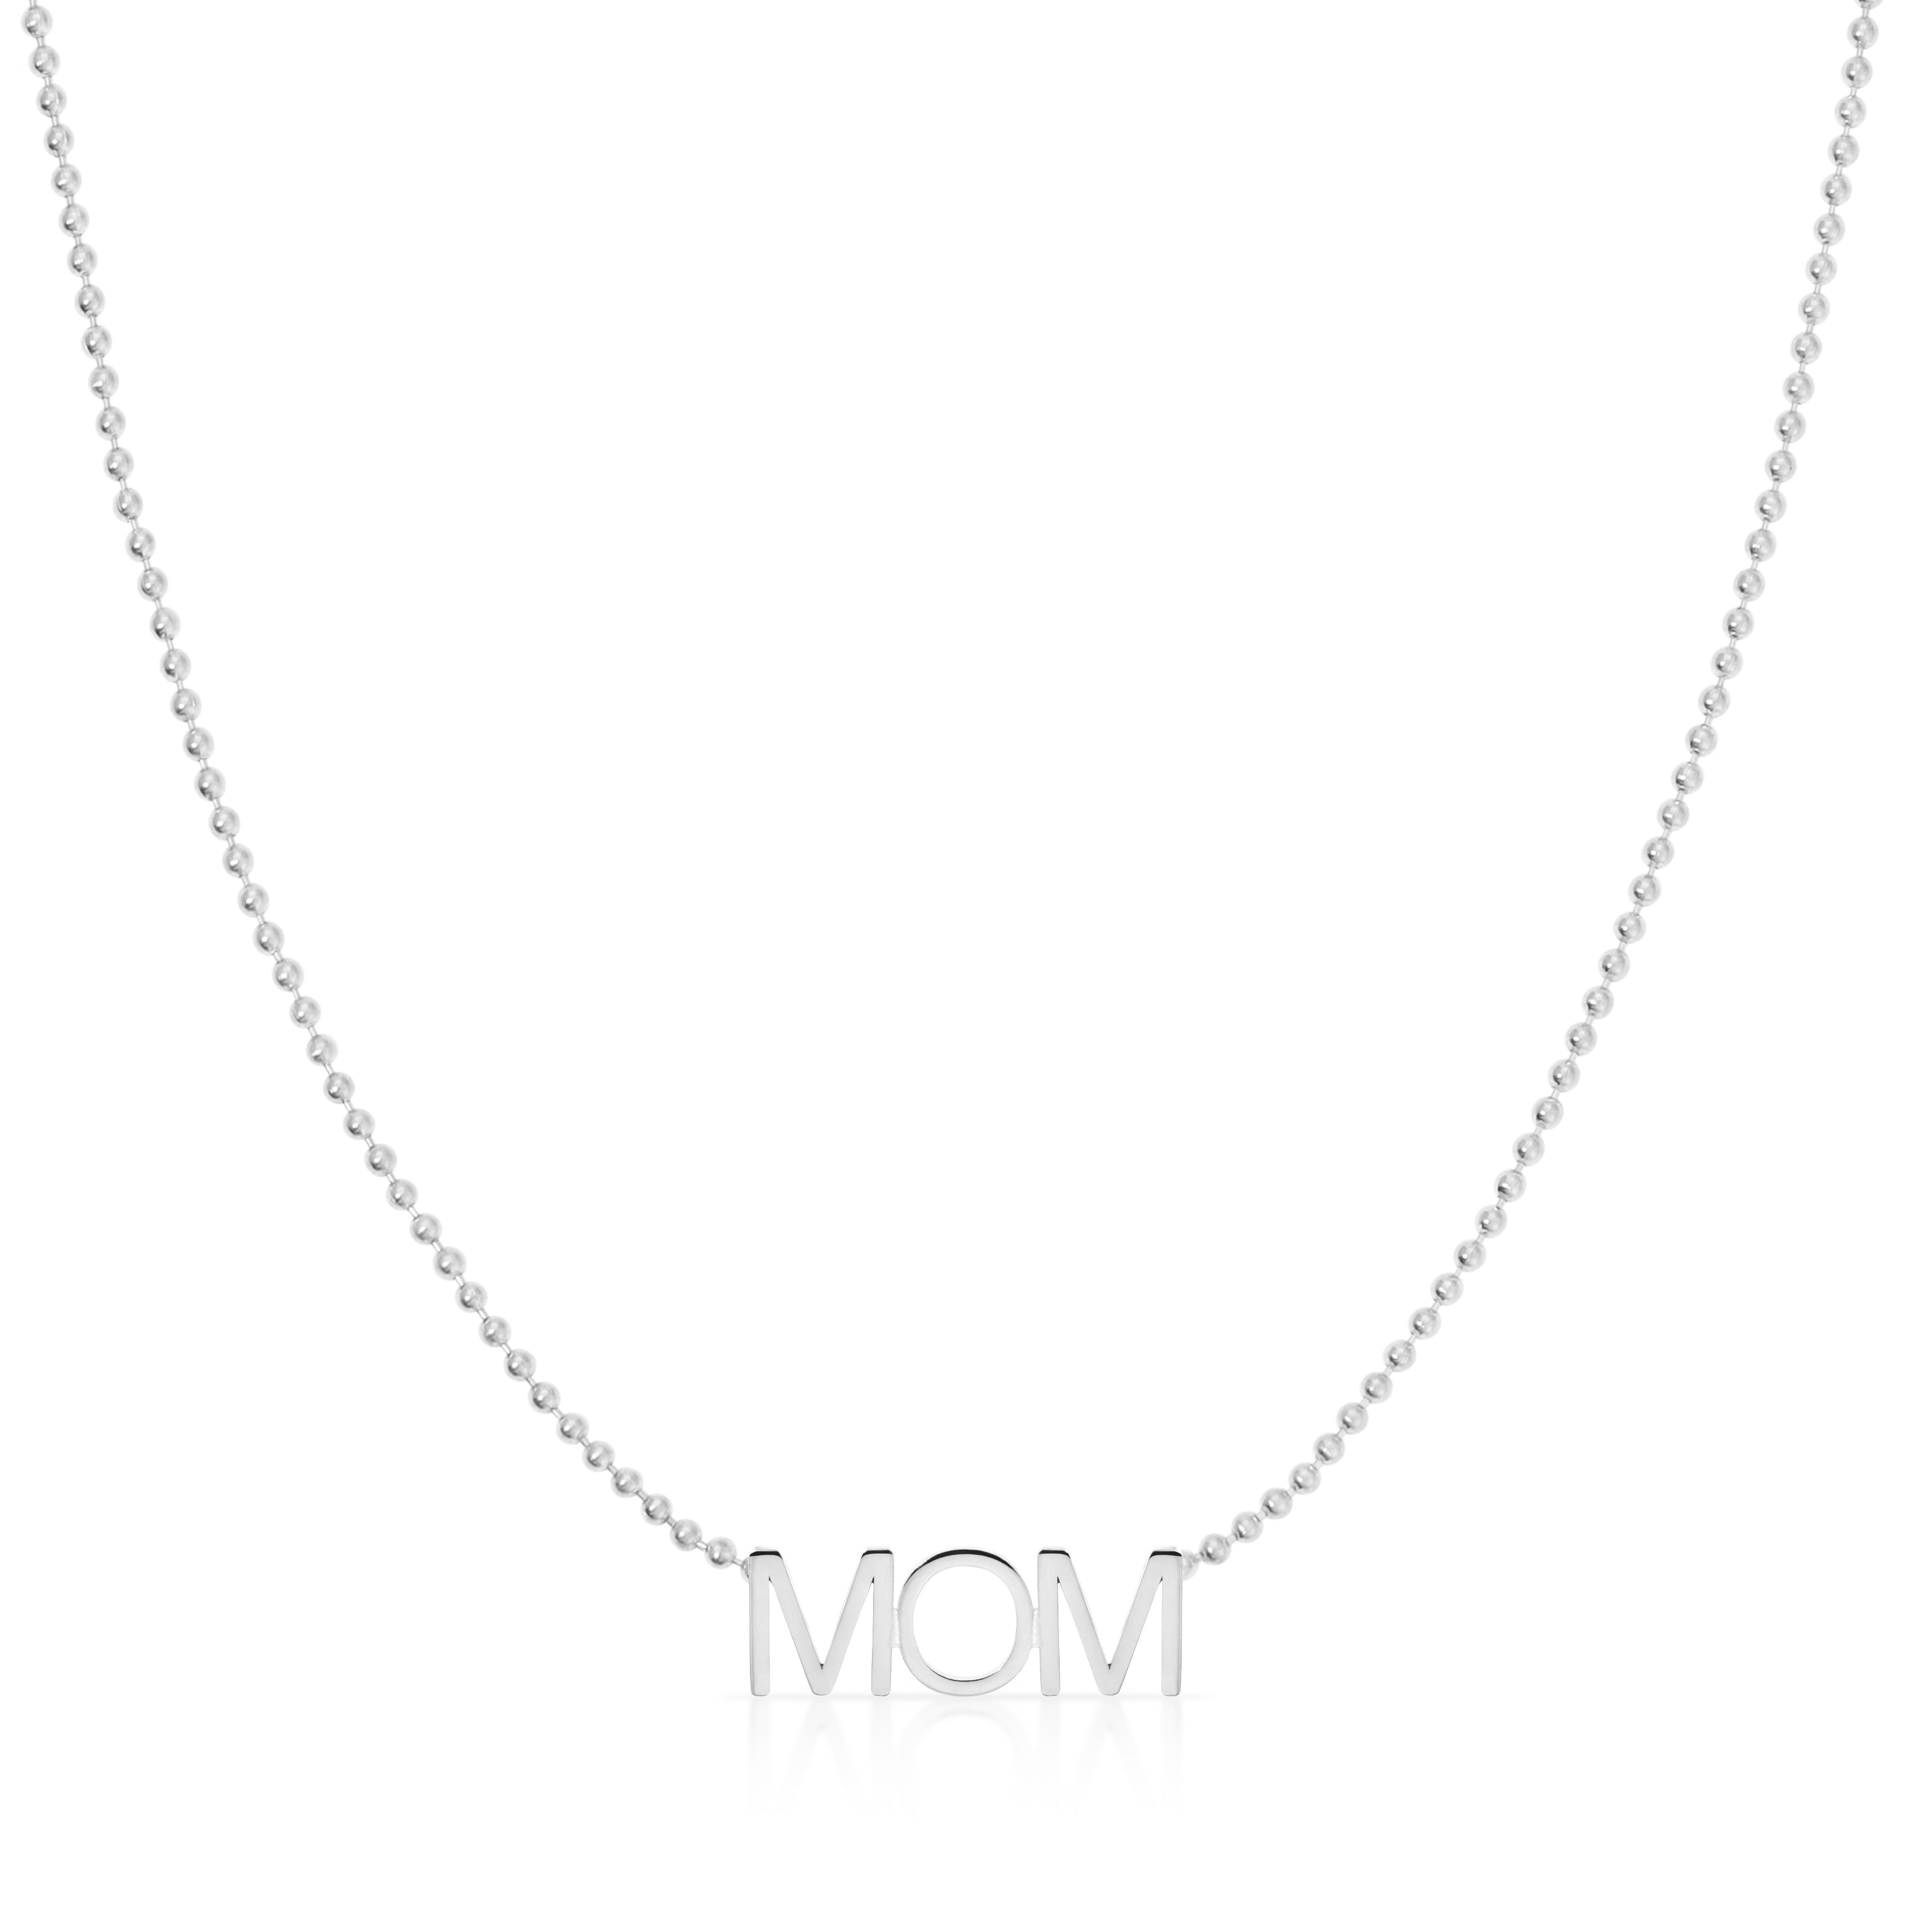 Mama Necklace - Mama Necklace | Ana Luisa | Online Jewelry Store At Prices  You'll Love